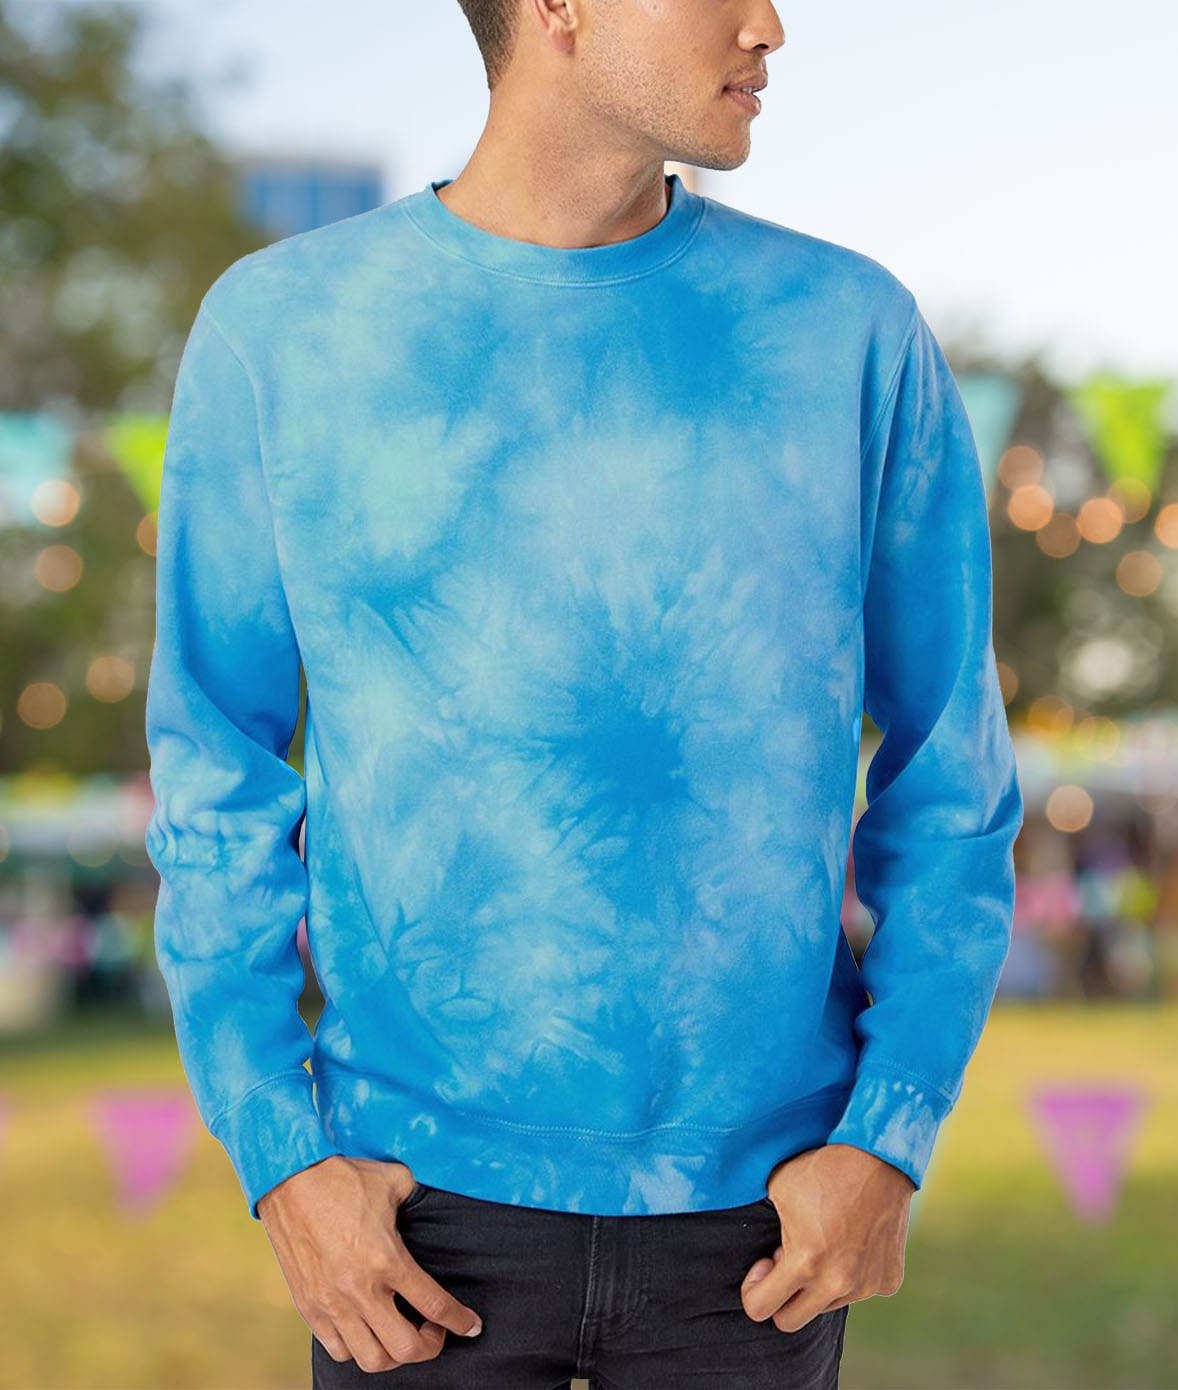 Men's Ridiculously Soft Tie-Dyed Pullover Sweatshirt Worn by Model